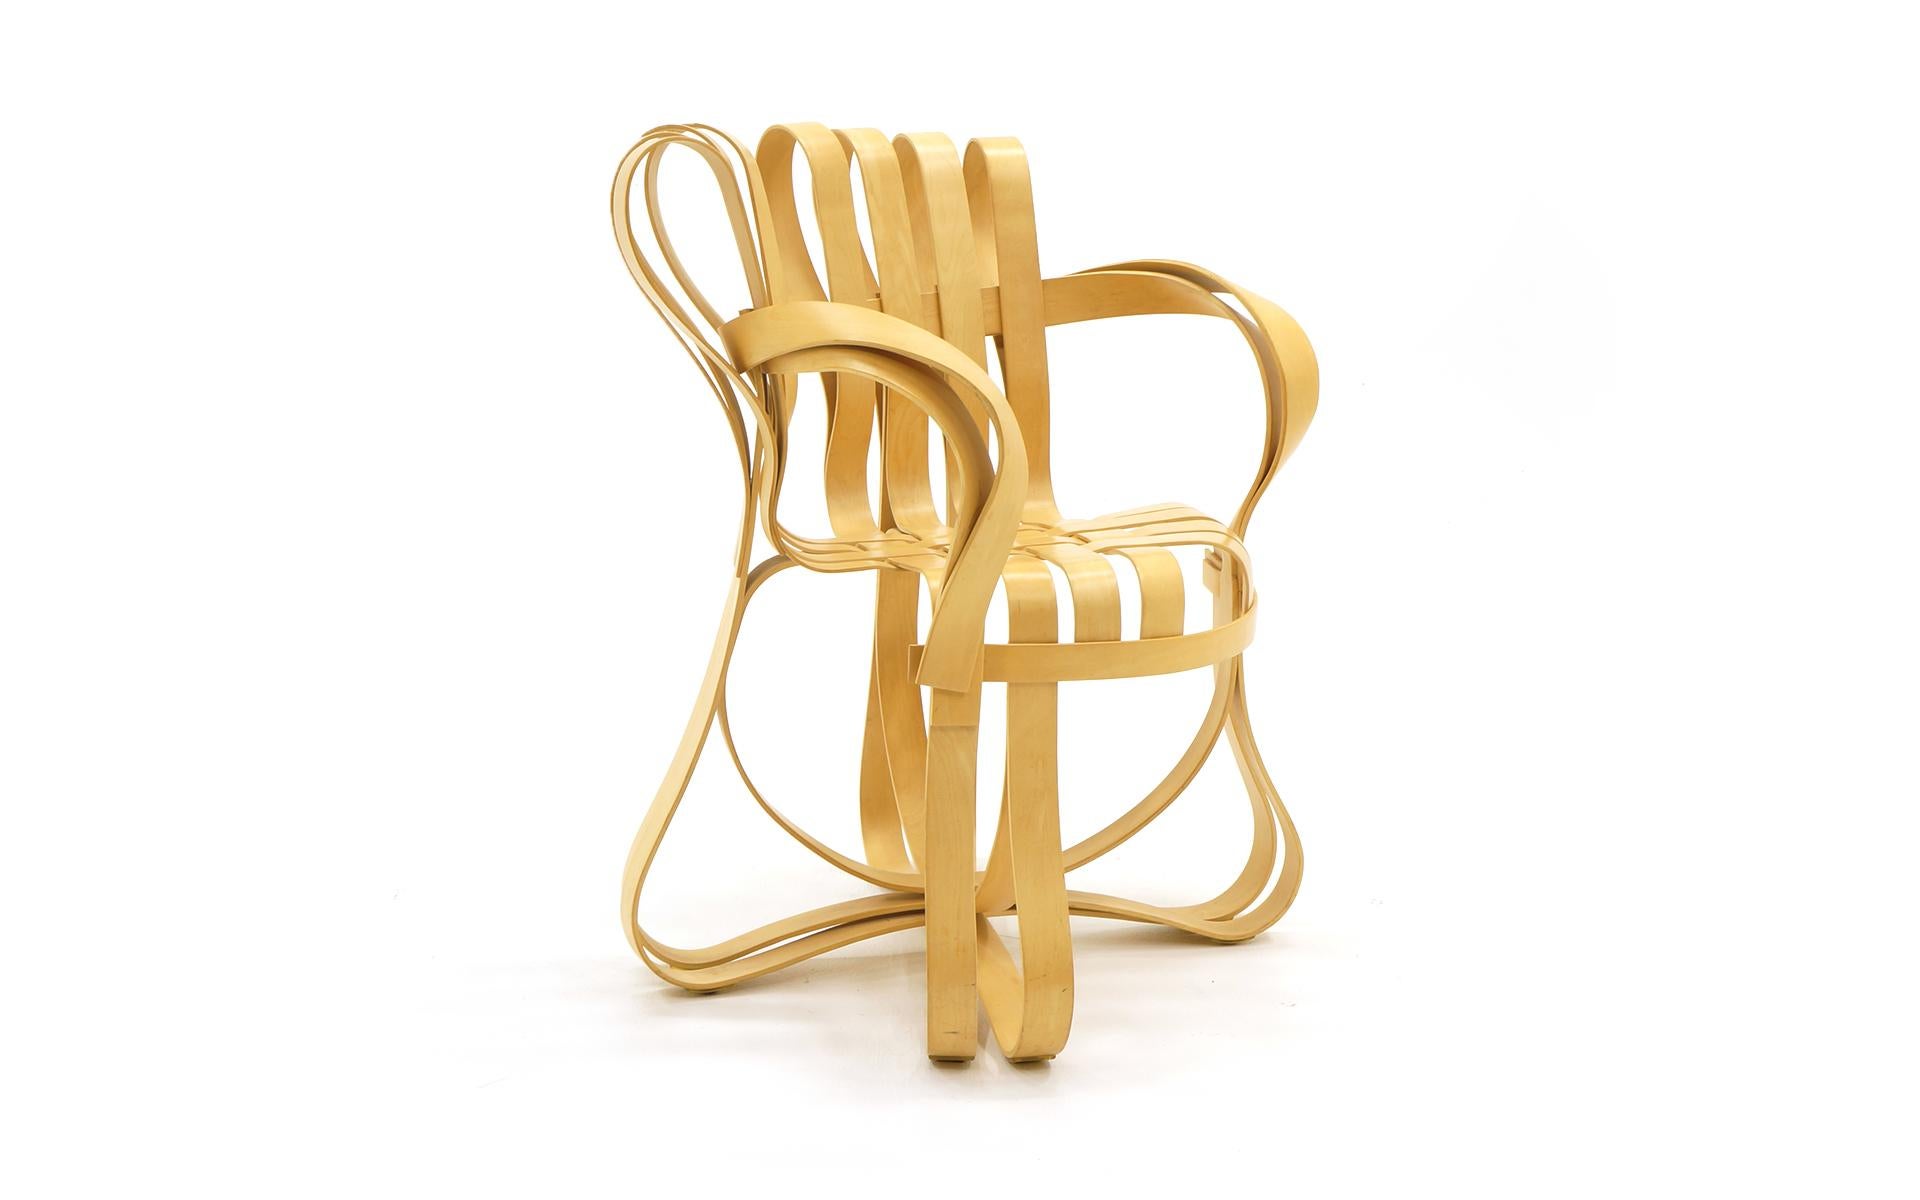 Frank Gehry cross check chair with arms manufactured by Knoll. A stunning piece of functional art made of interwoven maple strips. Signed with branded signature of Frank Gehry and Knoll.